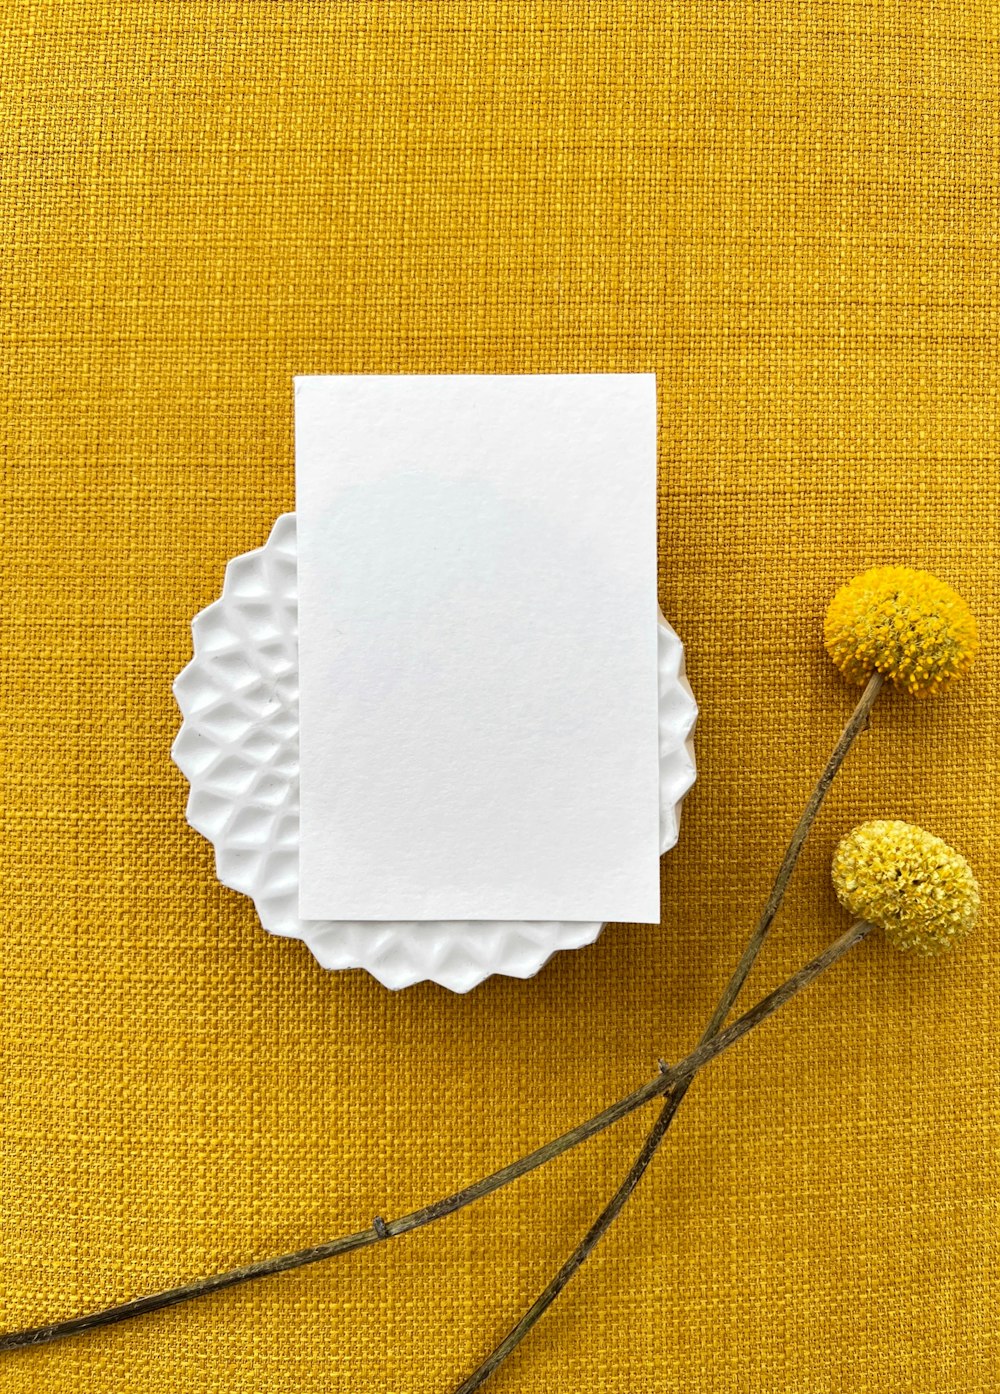 a yellow cloth with a white paper and some yellow flowers